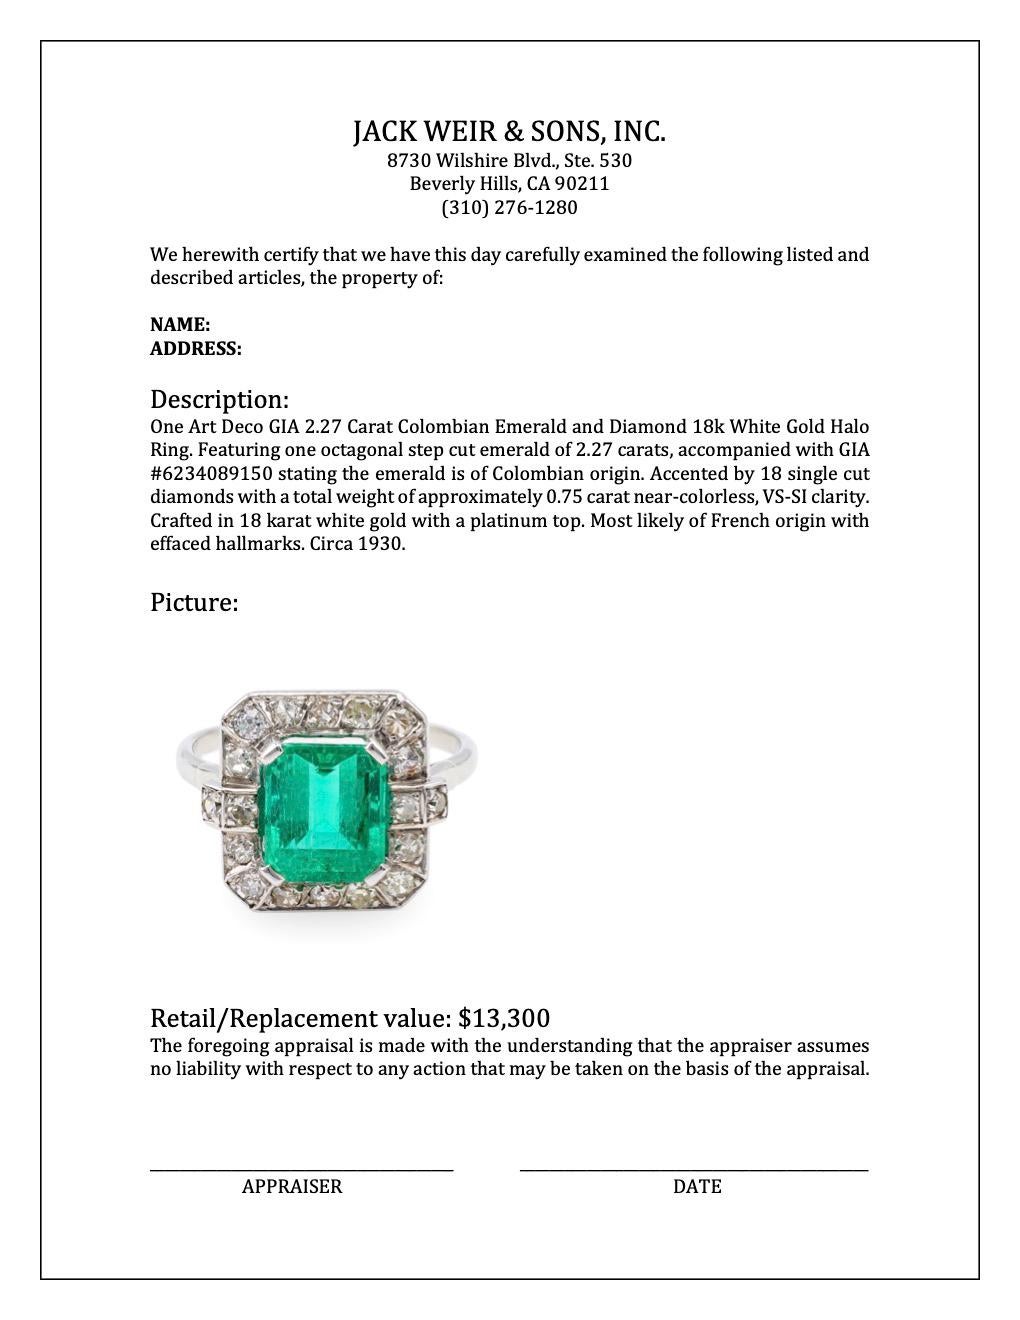 Art Deco GIA 2.27 Carat Colombian Emerald and Diamond 18k White Gold Halo Ring For Sale 3